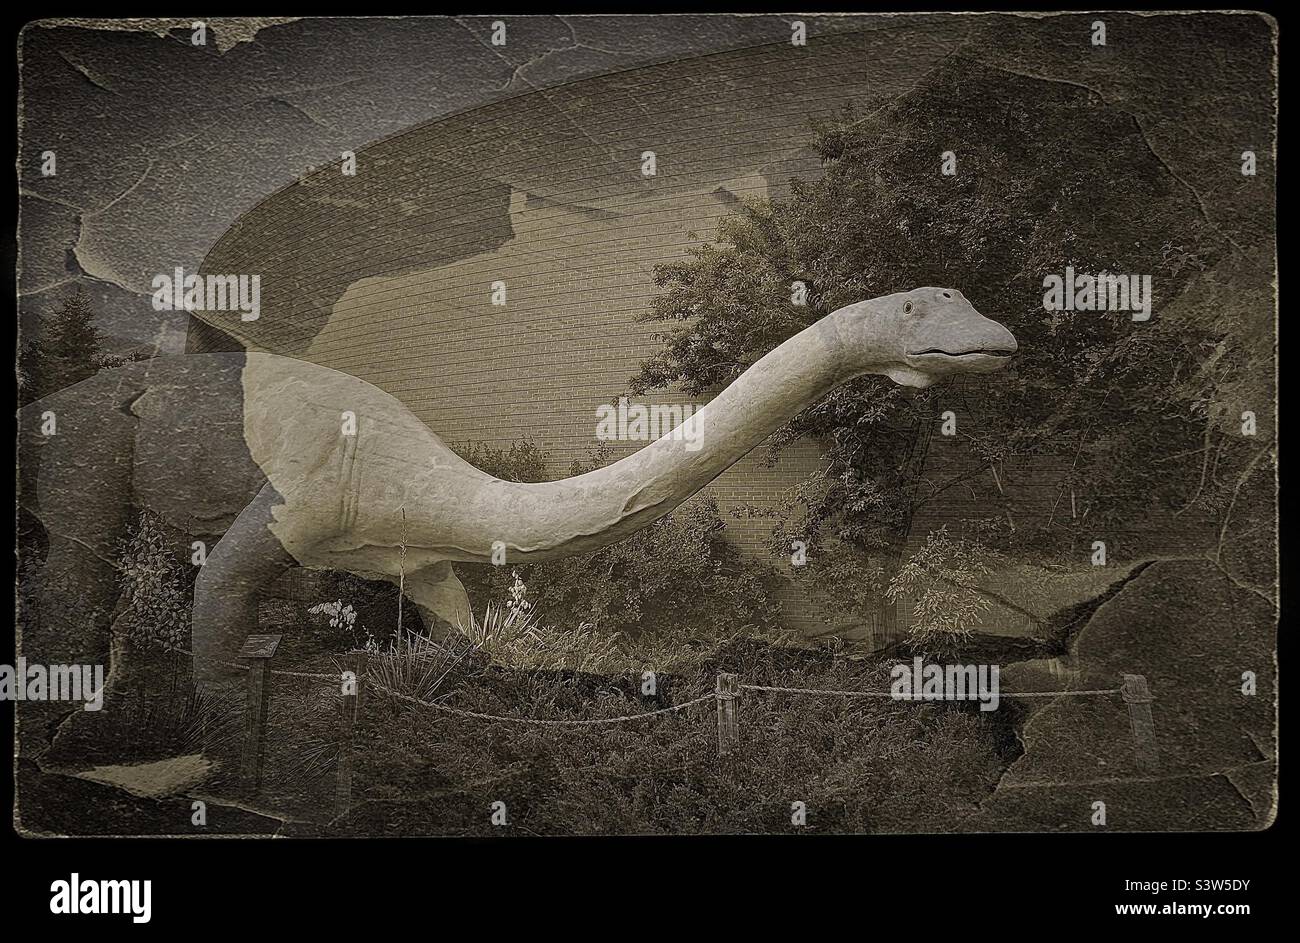 The outside grounds at the Dinosaur Museum in Vernal, Utah, USA. Visitors exploring these grounds will experience a prehistoric adventure. Color and grunge effects are digitally added. Stock Photo